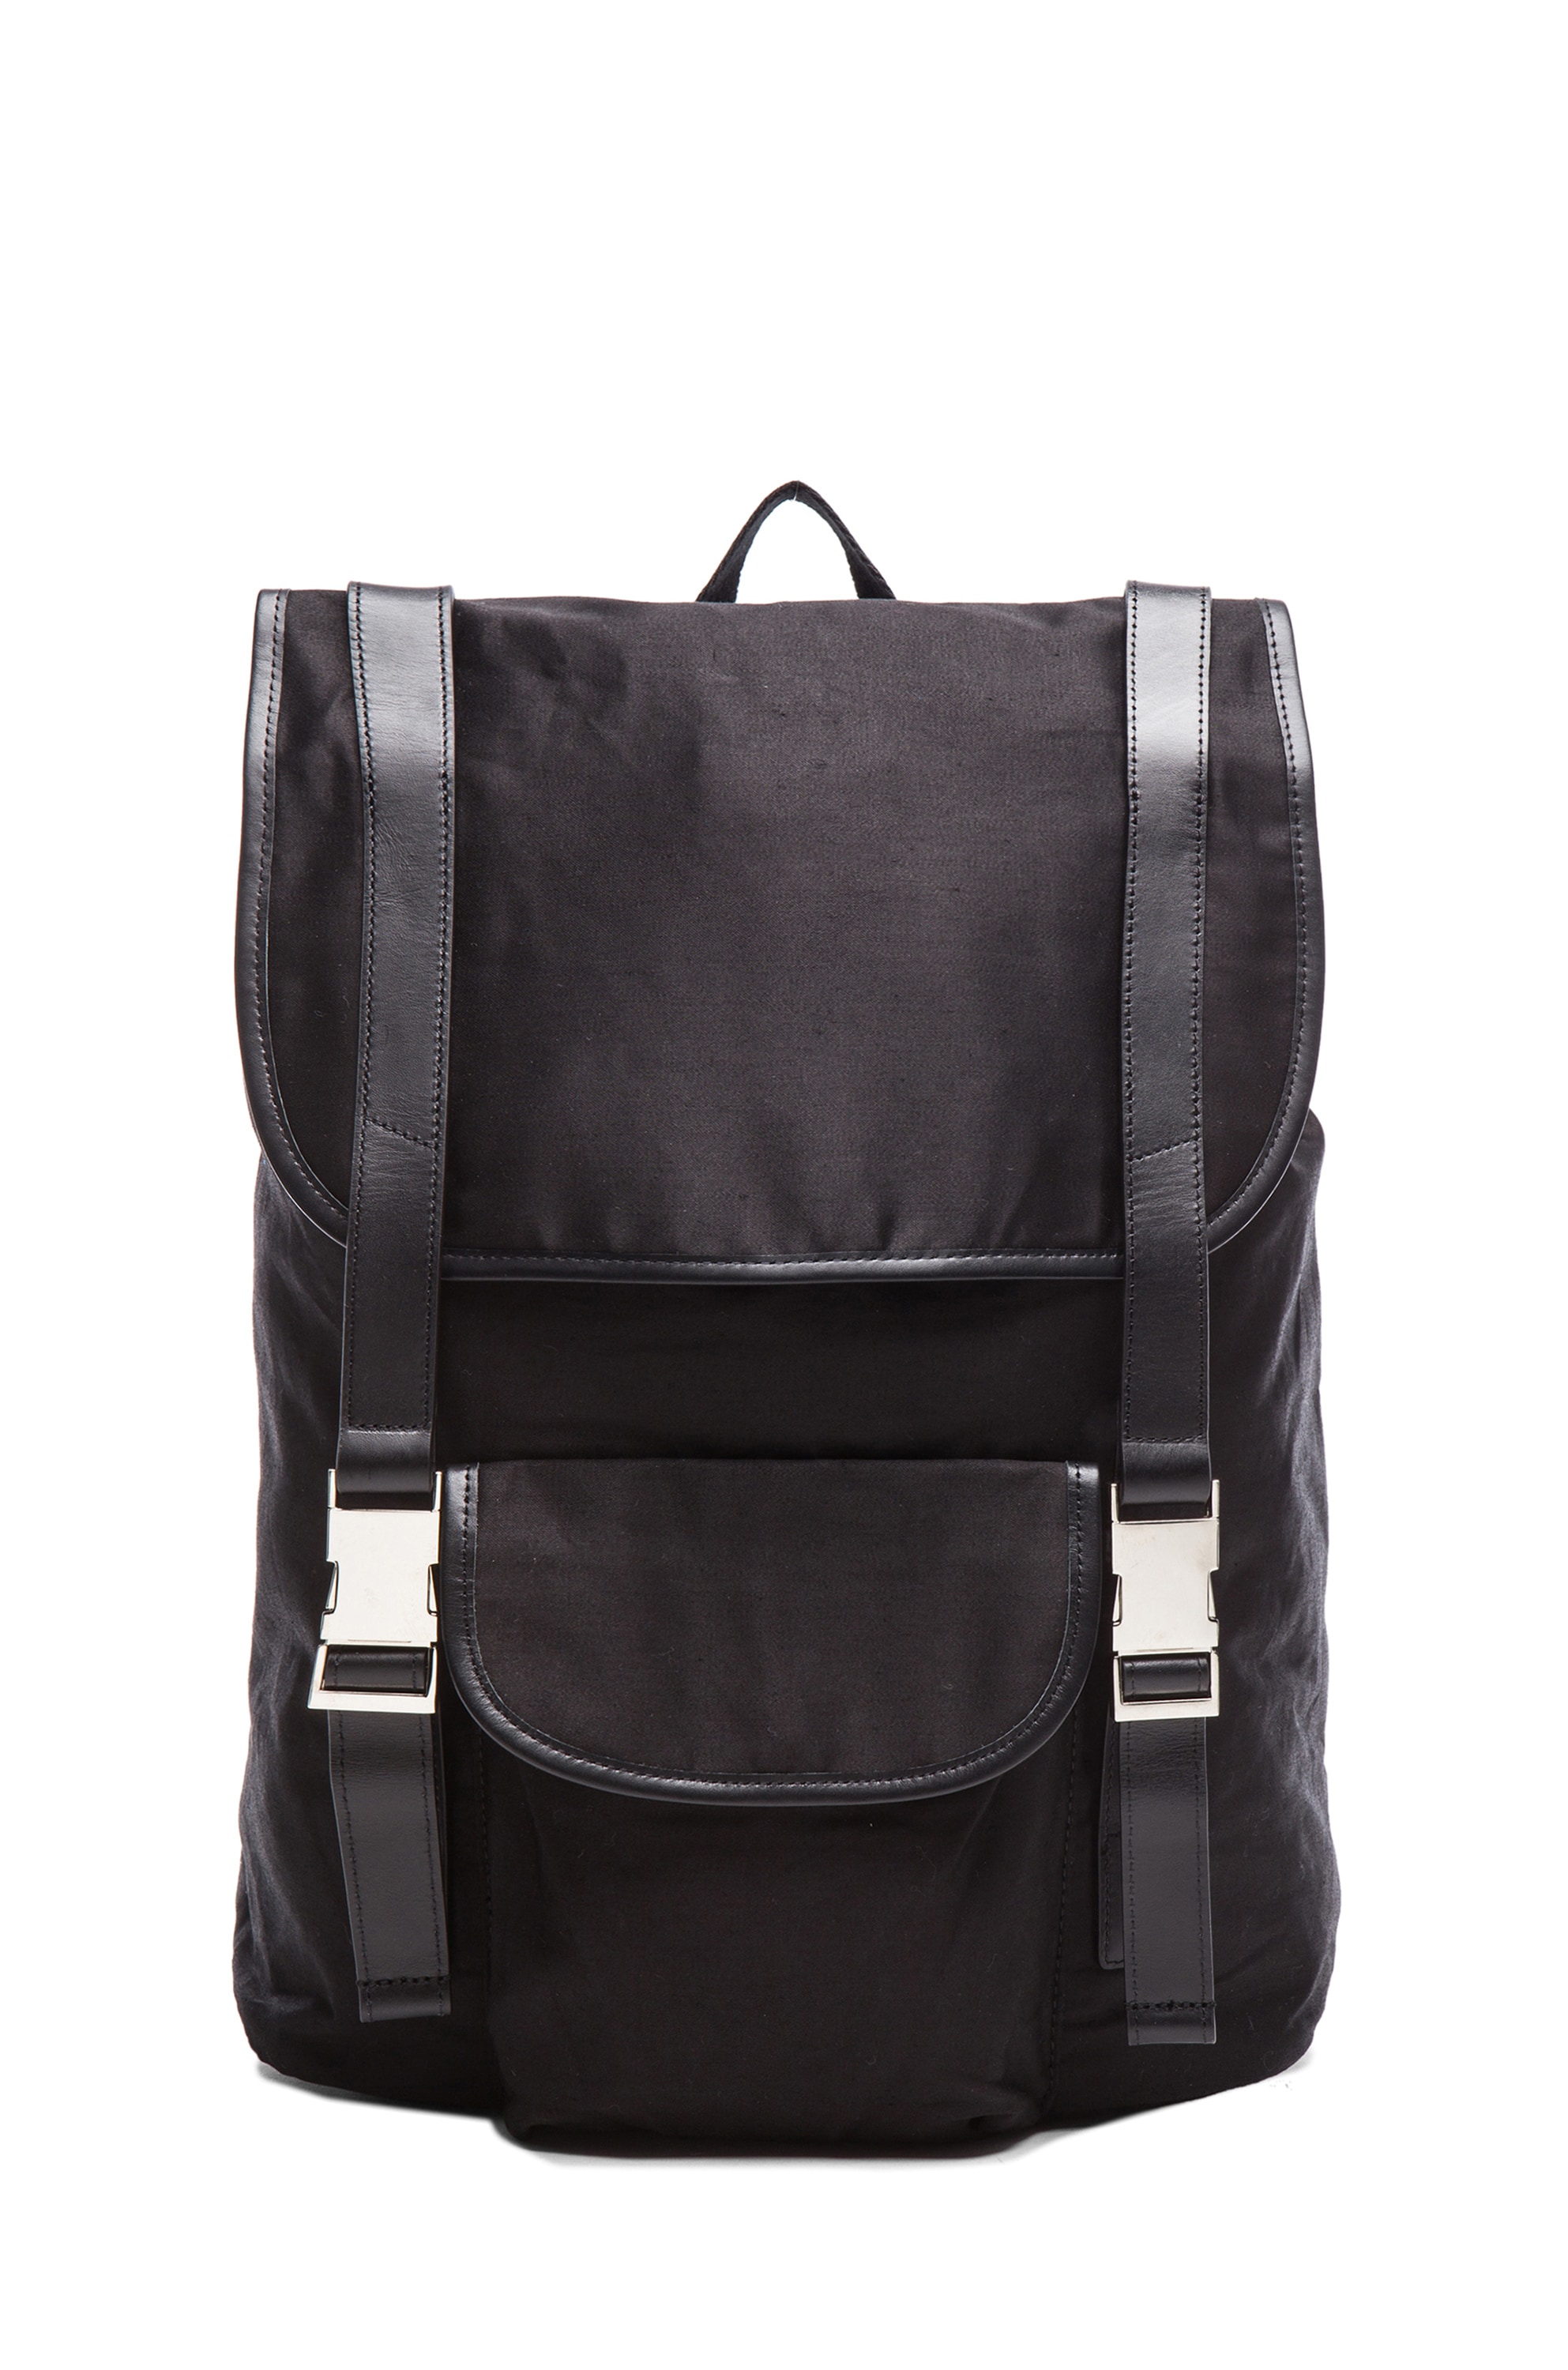 Image 1 of A.P.C. GI Backpack in Black